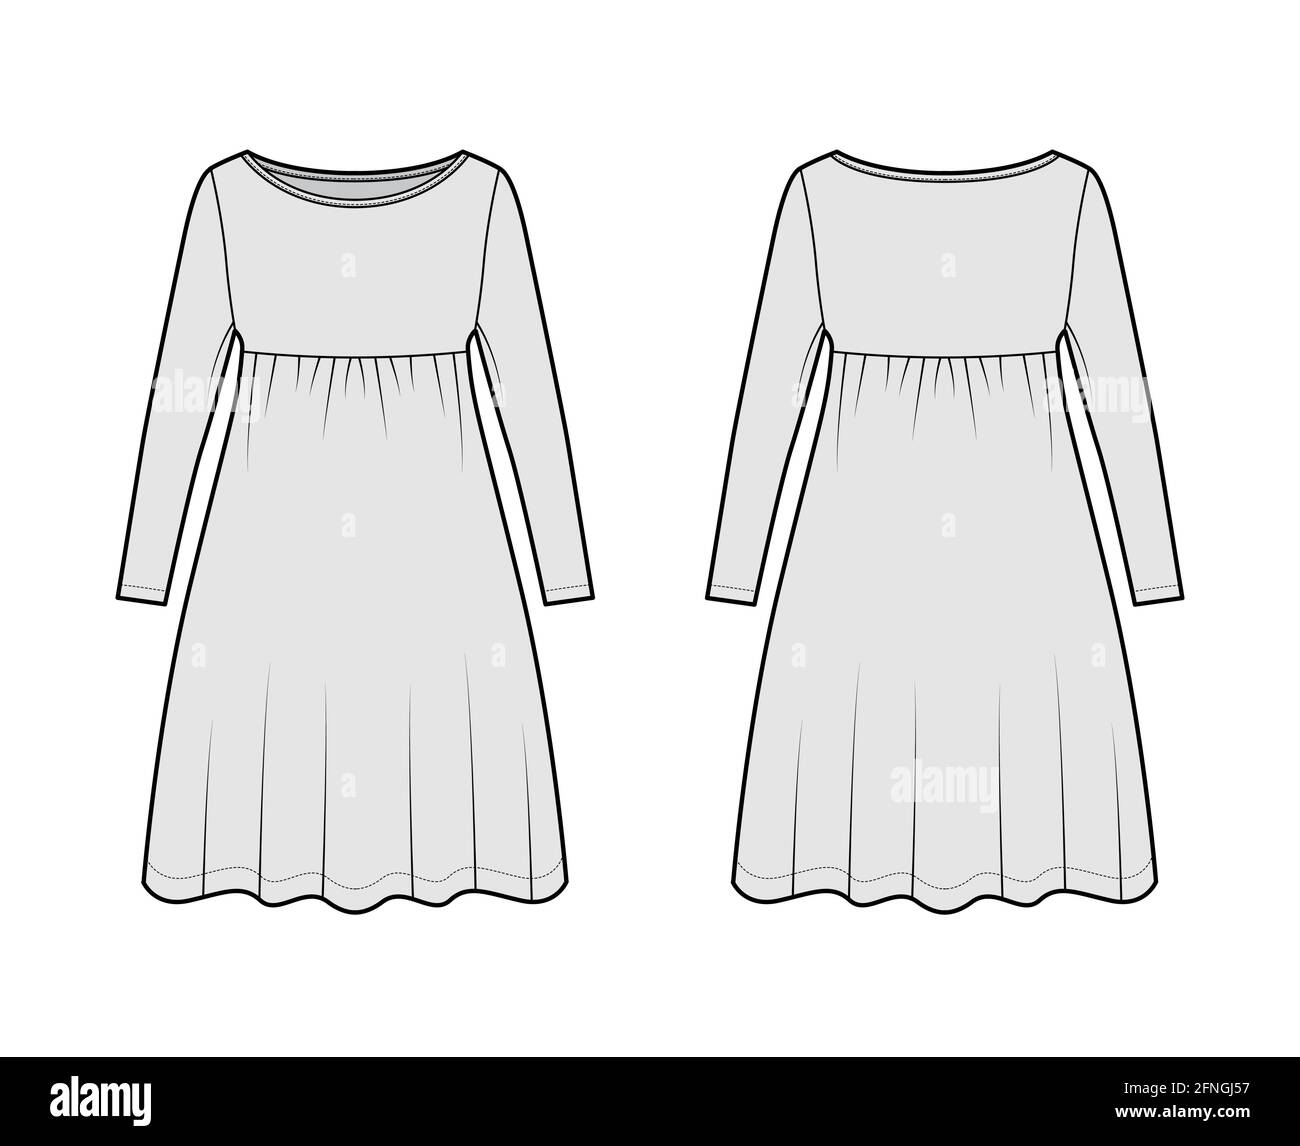 Dress babydoll technical fashion illustration with long sleeves, oversized body, knee length A-line skirt, boat neck. Flat apparel front, back, grey color style. Women, men unisex CAD mockup Stock Vector